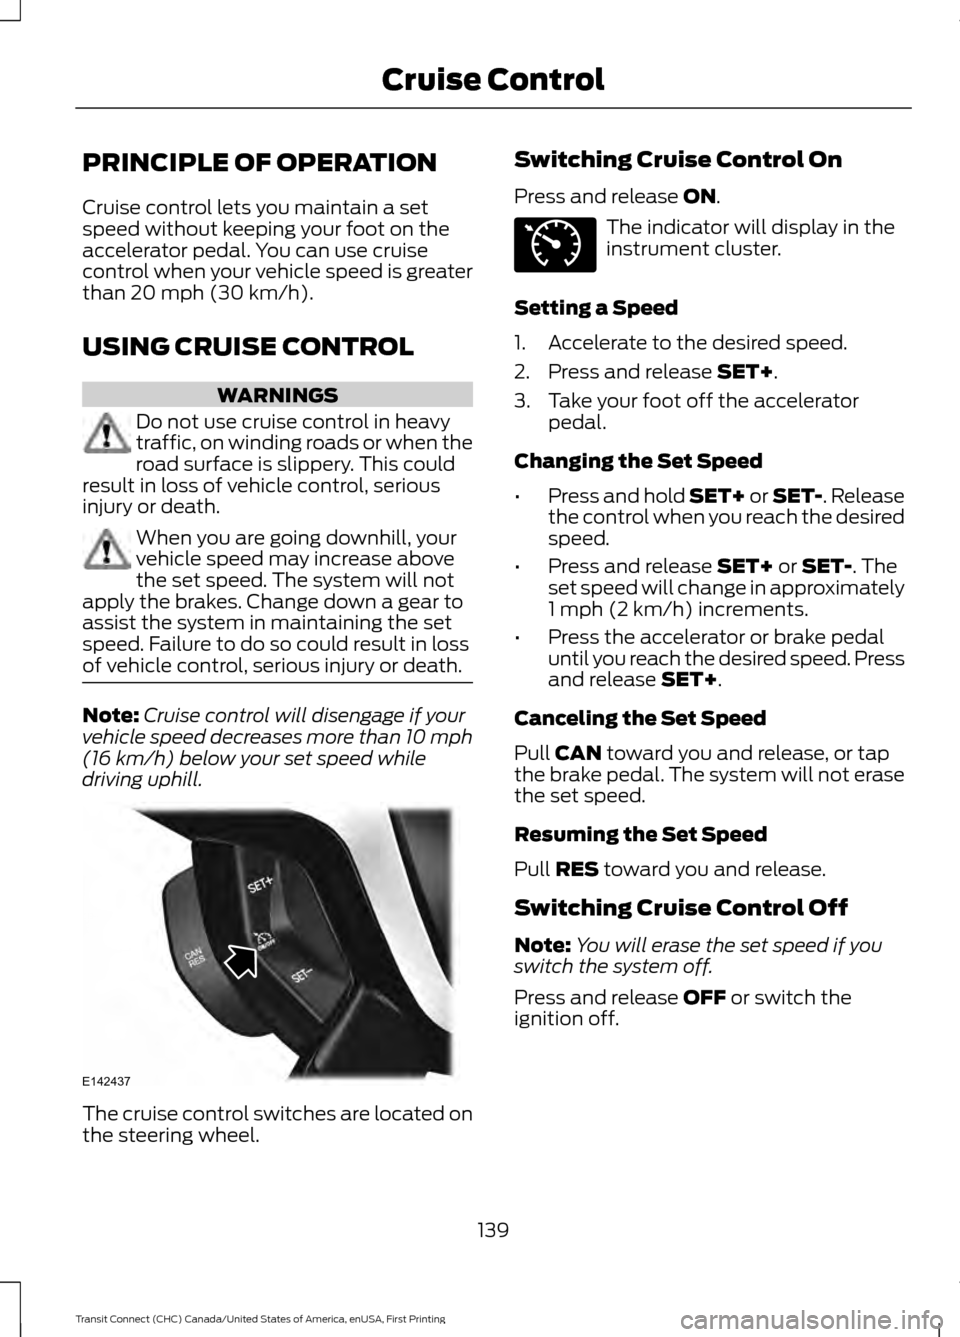 FORD TRANSIT CONNECT 2015 2.G Owners Manual PRINCIPLE OF OPERATION
Cruise control lets you maintain a set
speed without keeping your foot on the
accelerator pedal. You can use cruise
control when your vehicle speed is greater
than 20 mph (30 km